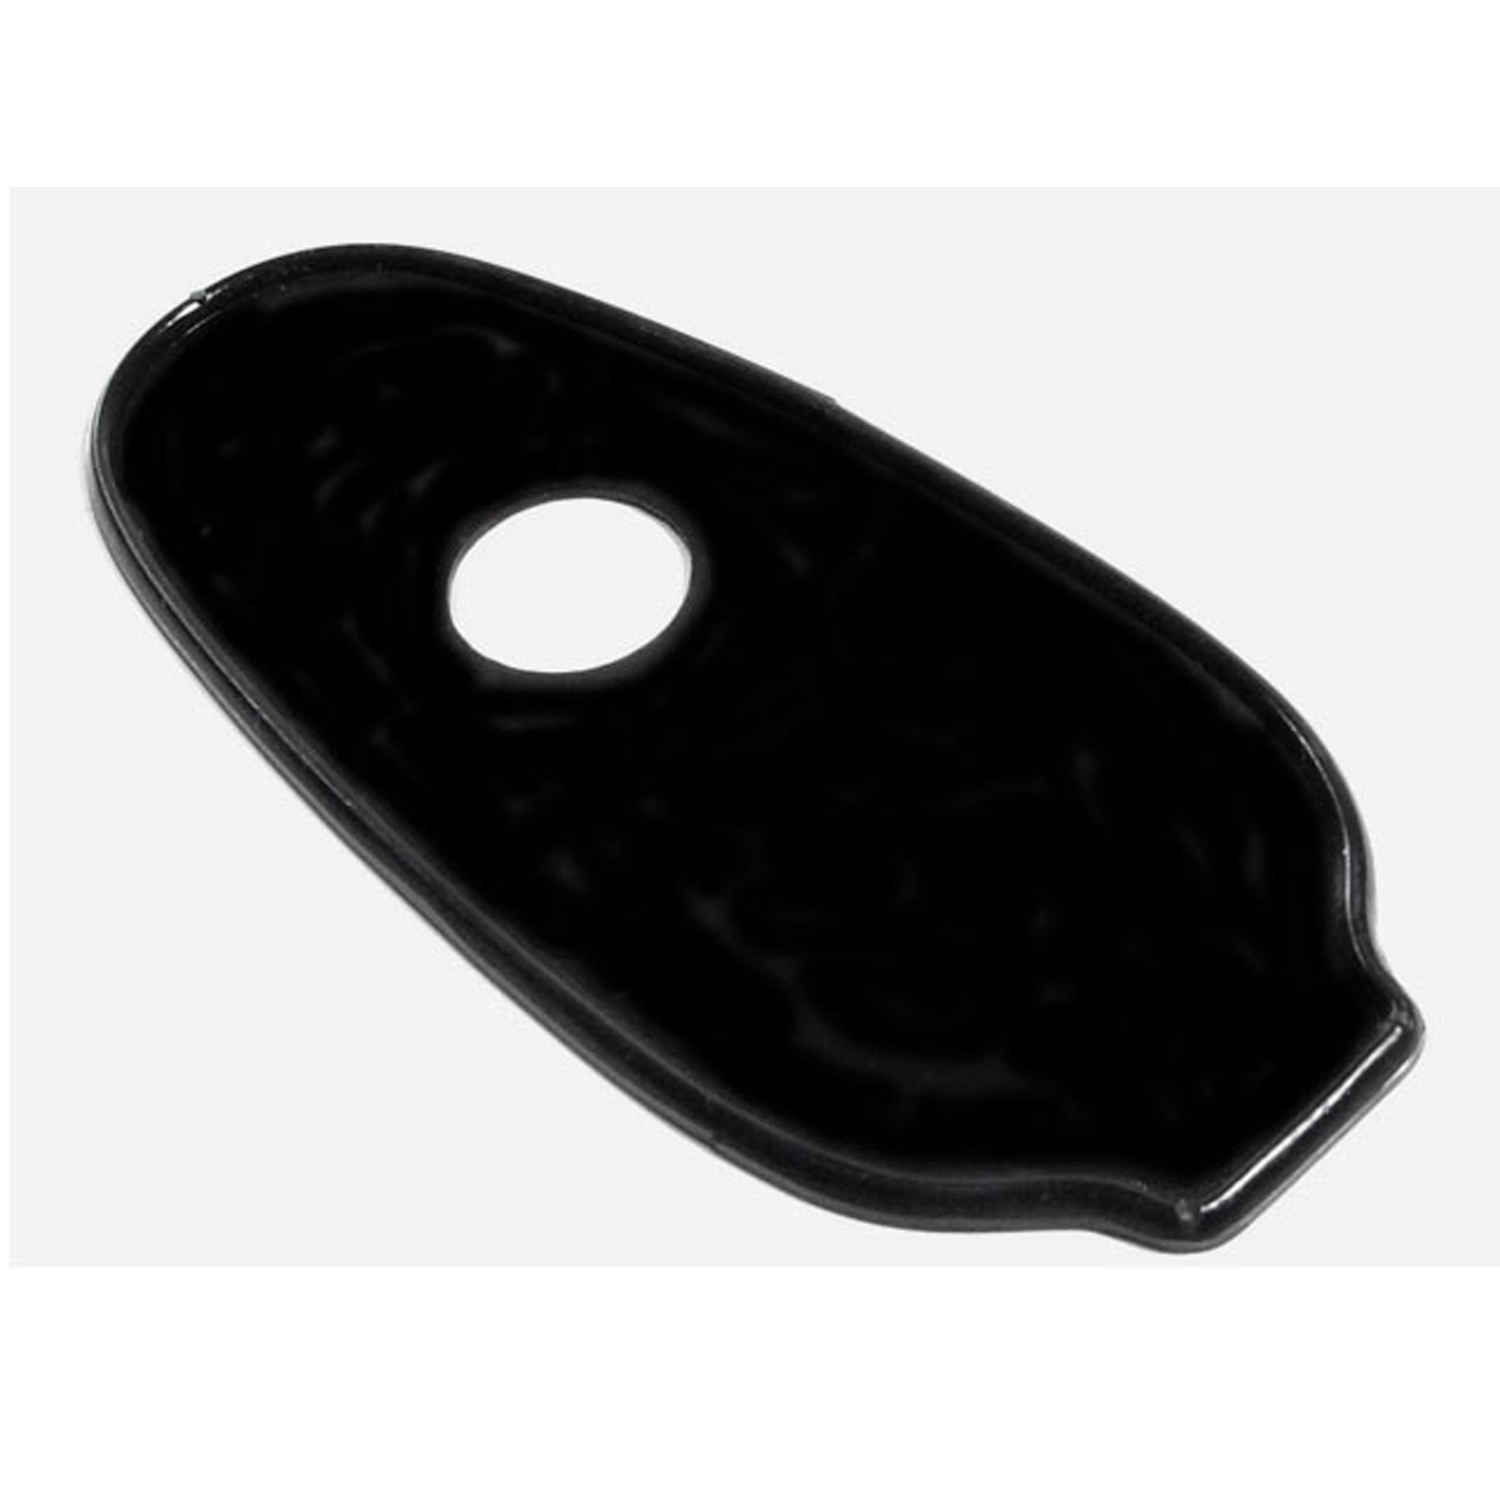 1953 Chrysler Town & Country Tailgate Handle Pad.  2-3/4 wide X 5-7/8 long.  Each-MP 551-A